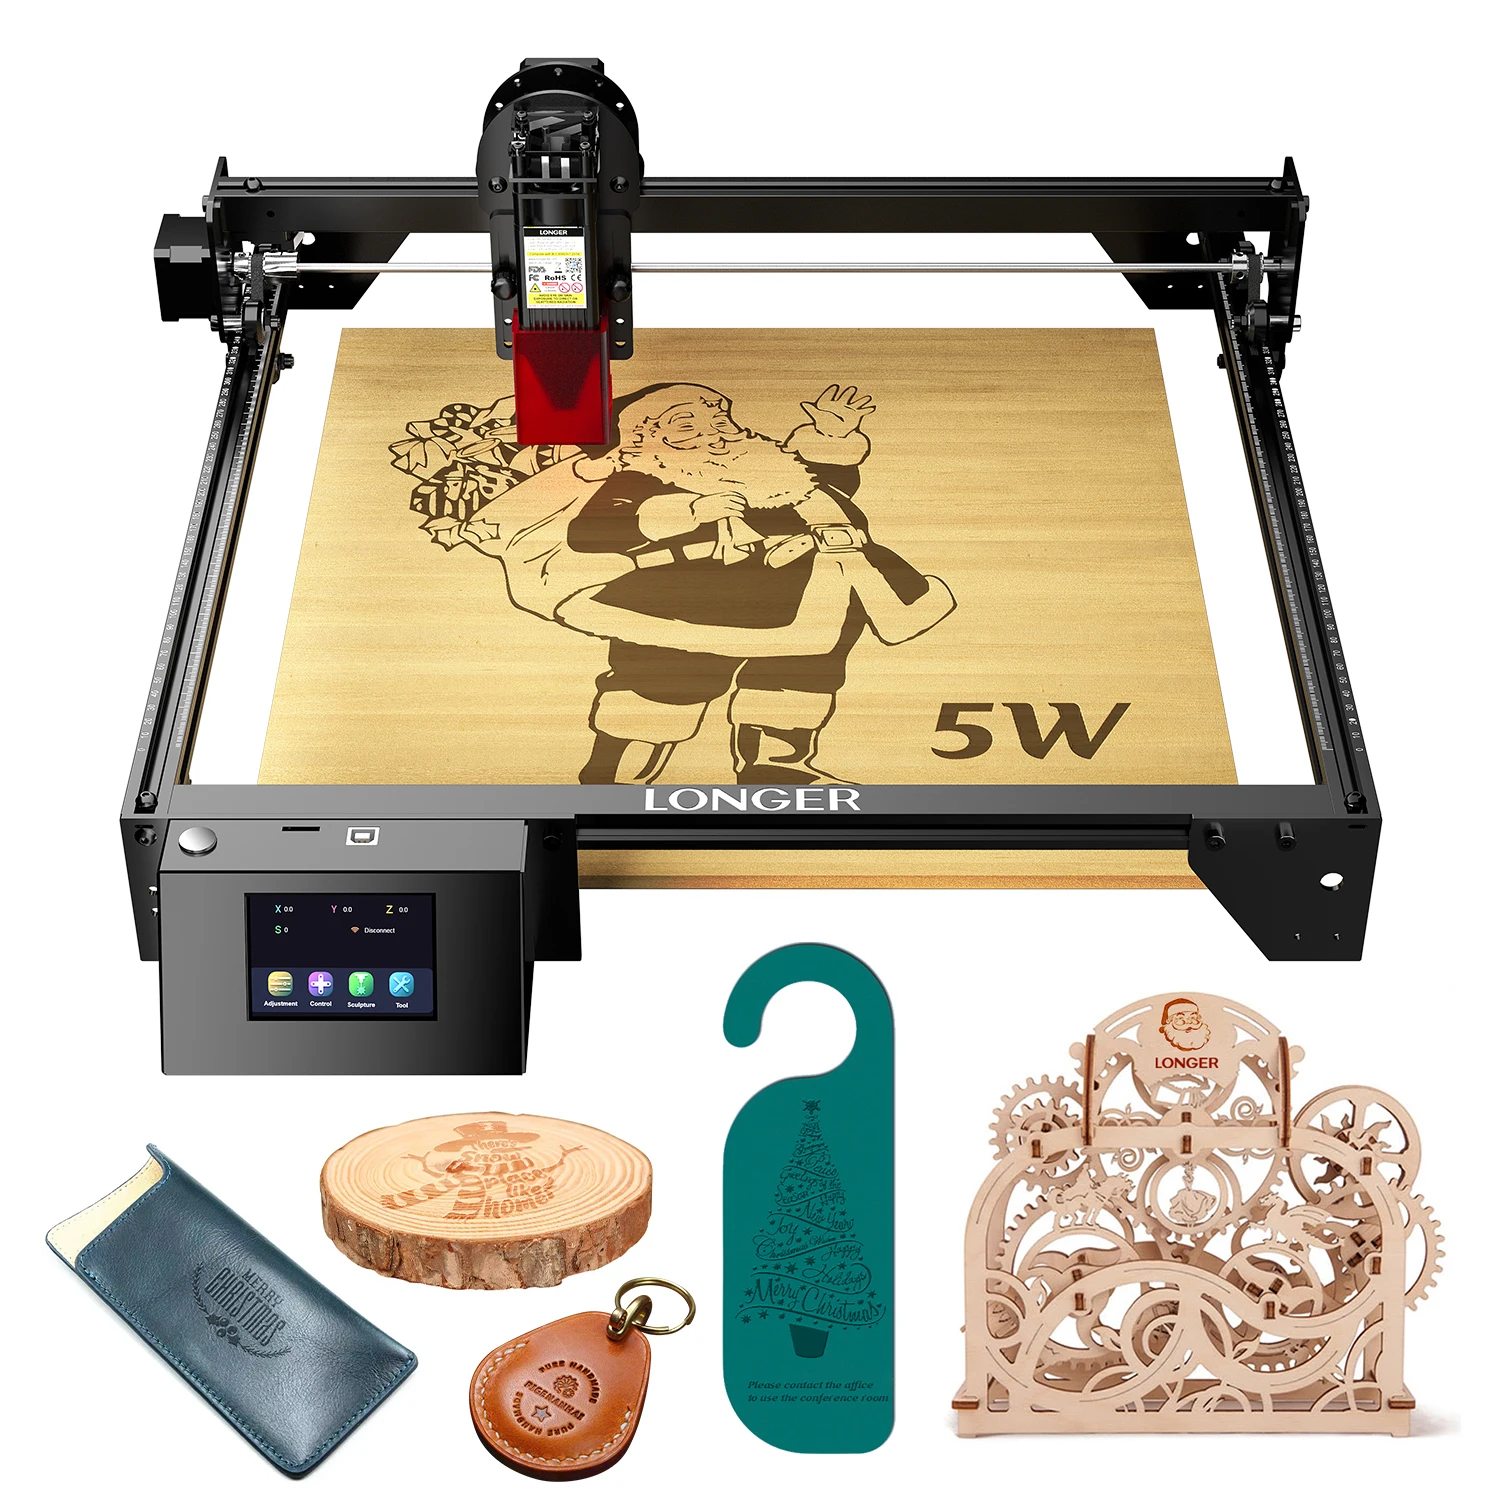 

LONGER RAY5 5W Laser Engraver Cutting Machine 400x400mm Quick Focus Wifi Control Move Protection For Wood metal acrylic glass